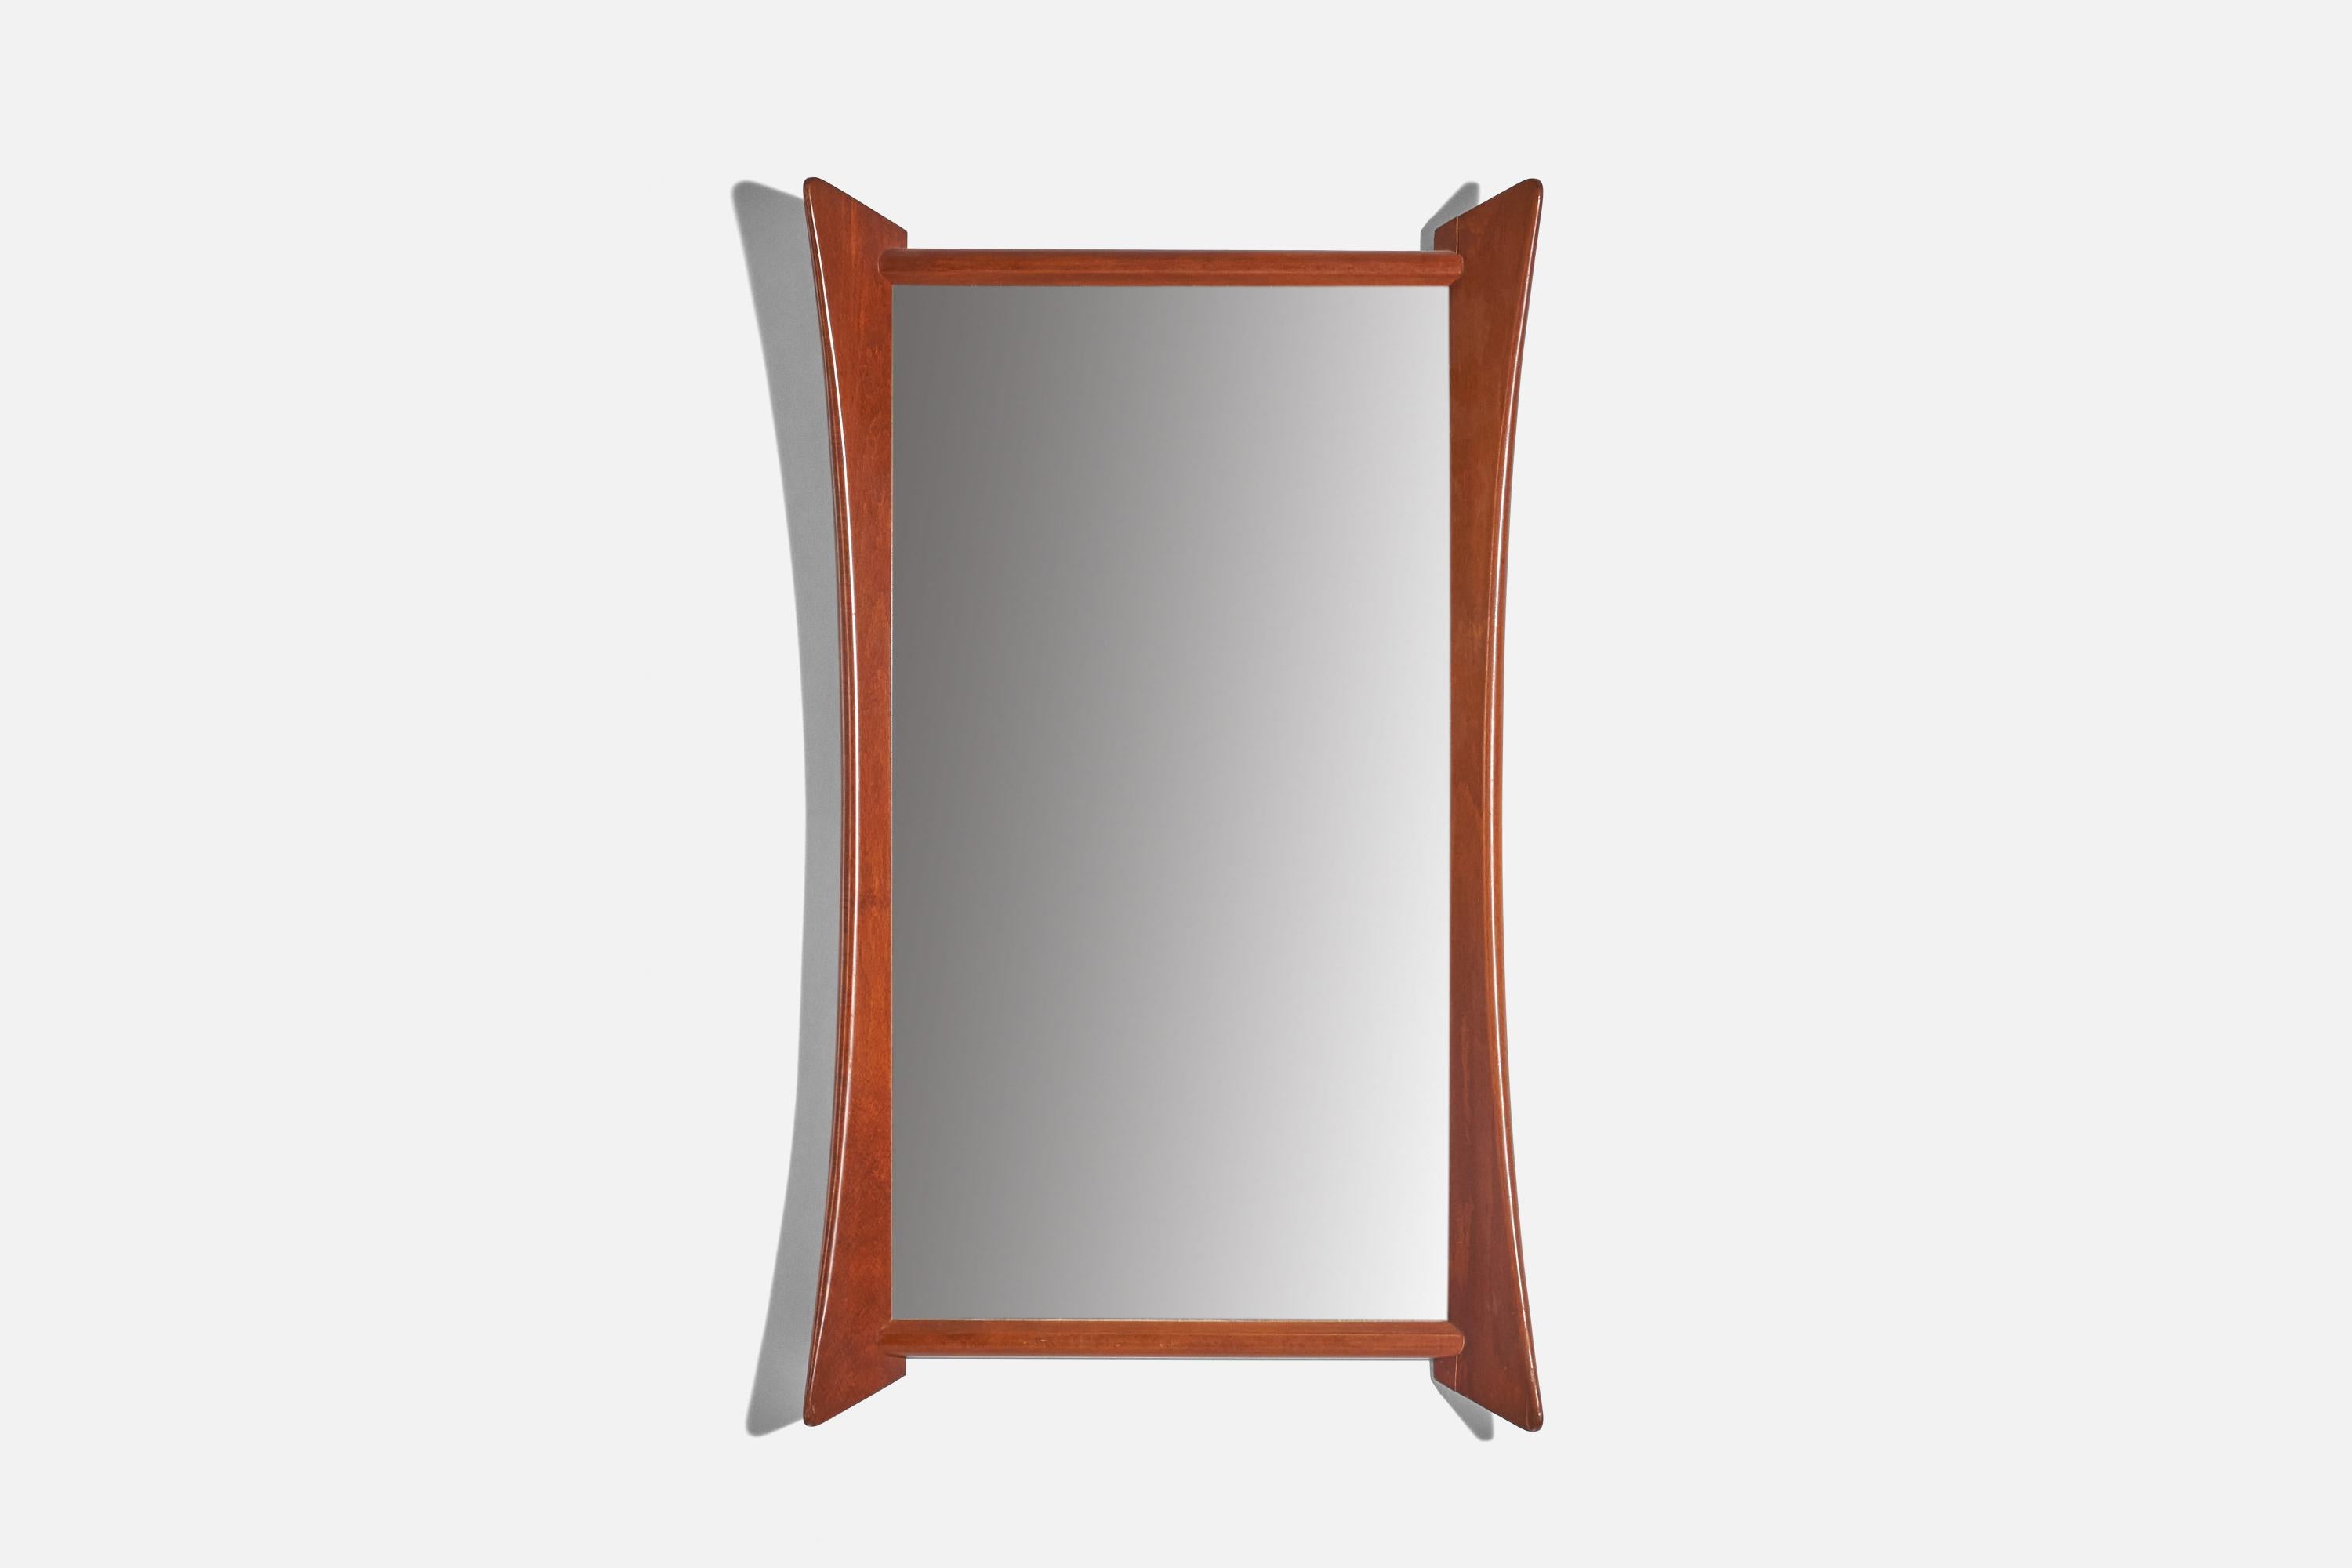 A solid teak wall mirror designed and produced by Wilkensons Ramfabrik, Göteborg, Sweden, 1950s.